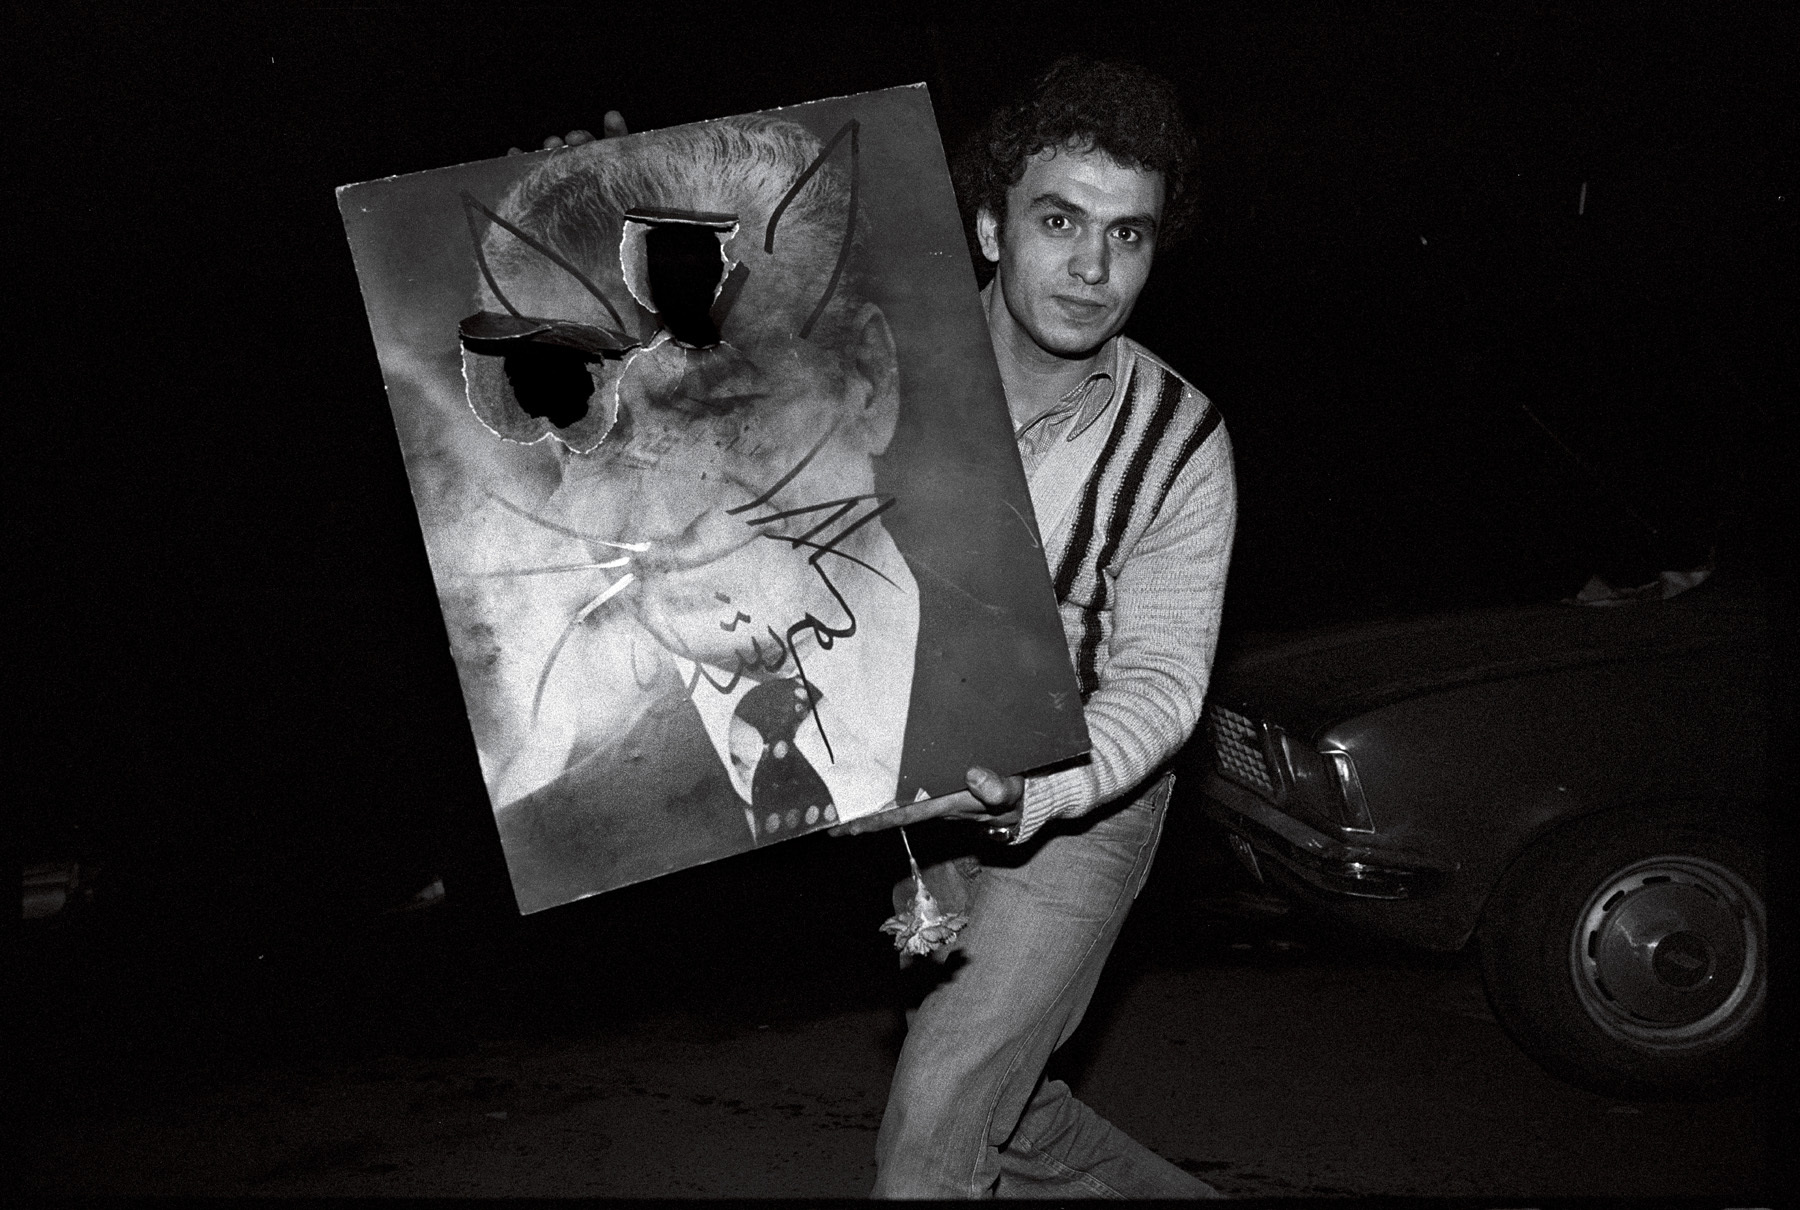 A young man displays a defaced portrait of the Shah.